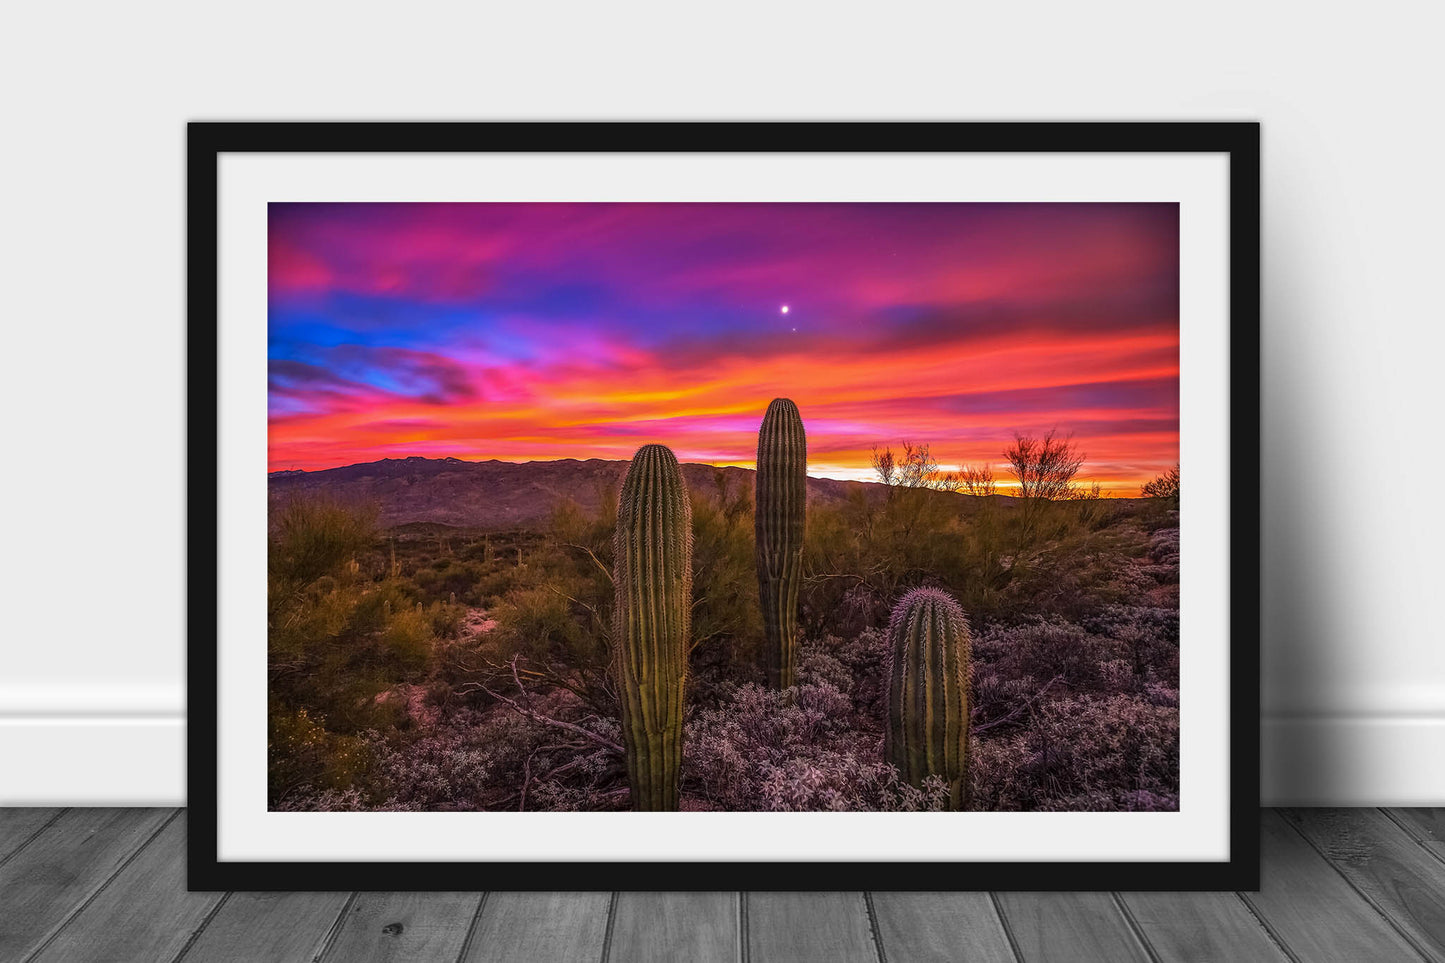 Framed and matted southwestern print of Venus and Jupiter shining above saguaro cactus during a vibrant sunrise in the Sonoran Desert by Sean Ramsey of Southern Plains Photography.